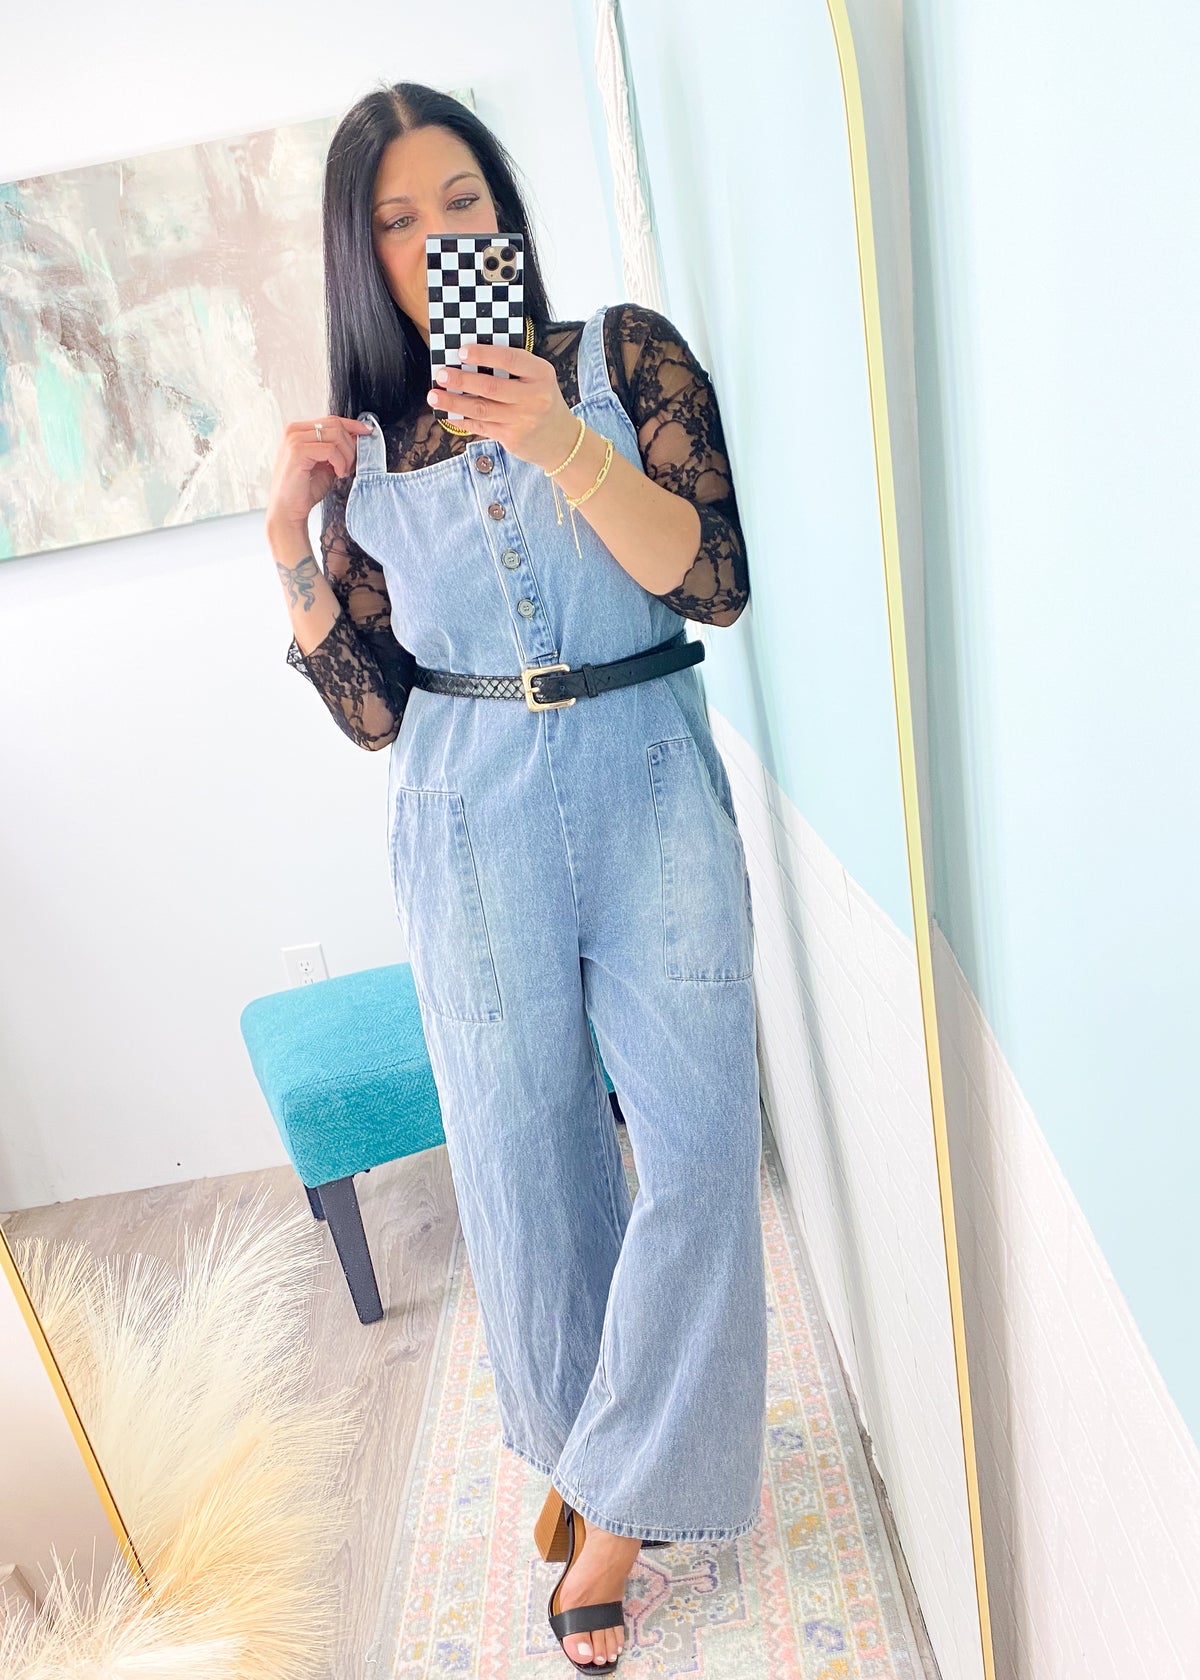 'She's All That' Wide Leg Trouser Jean Jumpsuit-This jean jumpsuit is all that and so much more! The wide leg trouser style looks good with heels, sneakers, boots &amp; sandals. The denim is non rigid which we love! Wear it alone with your fav bandeaus or layer with tanks, bodysuits, tees and long sleeve tops in the Fall/Winter. Add a belt for a more structured outfit.-Cali Moon Boutique, Plainville Connecticut